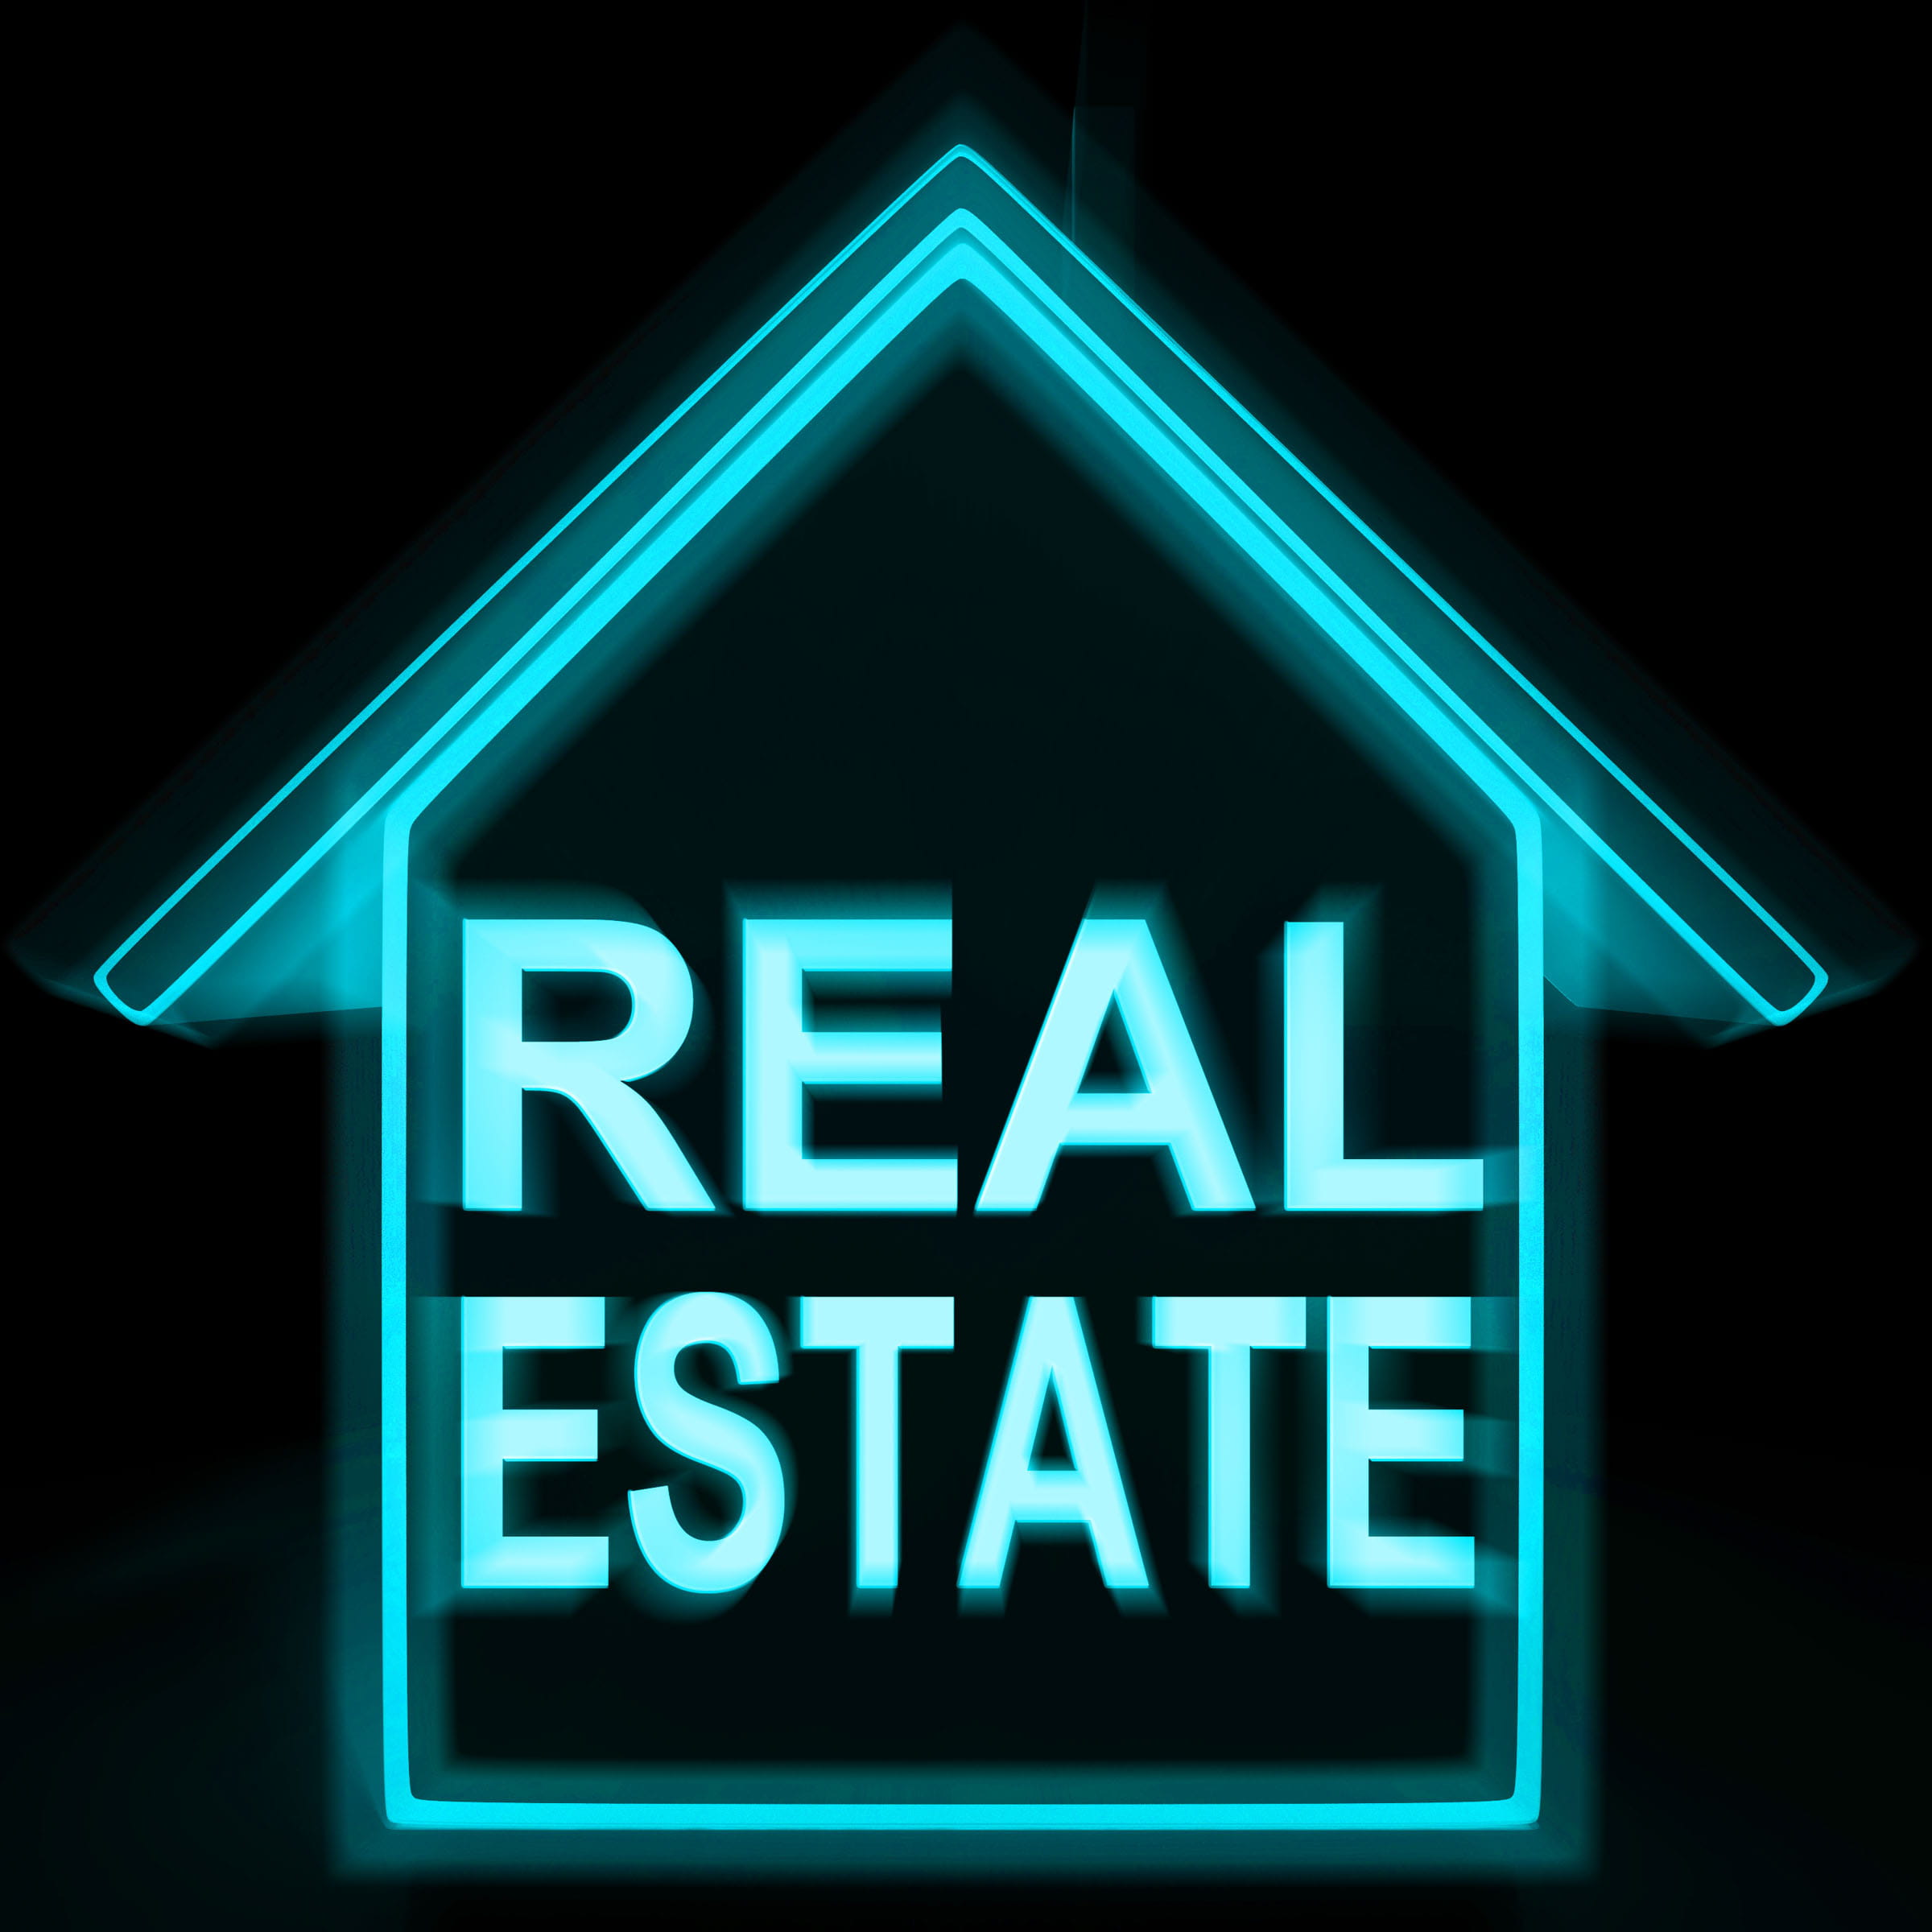 Real Estate Home Showing Selling Property Land Or Buildings, buy